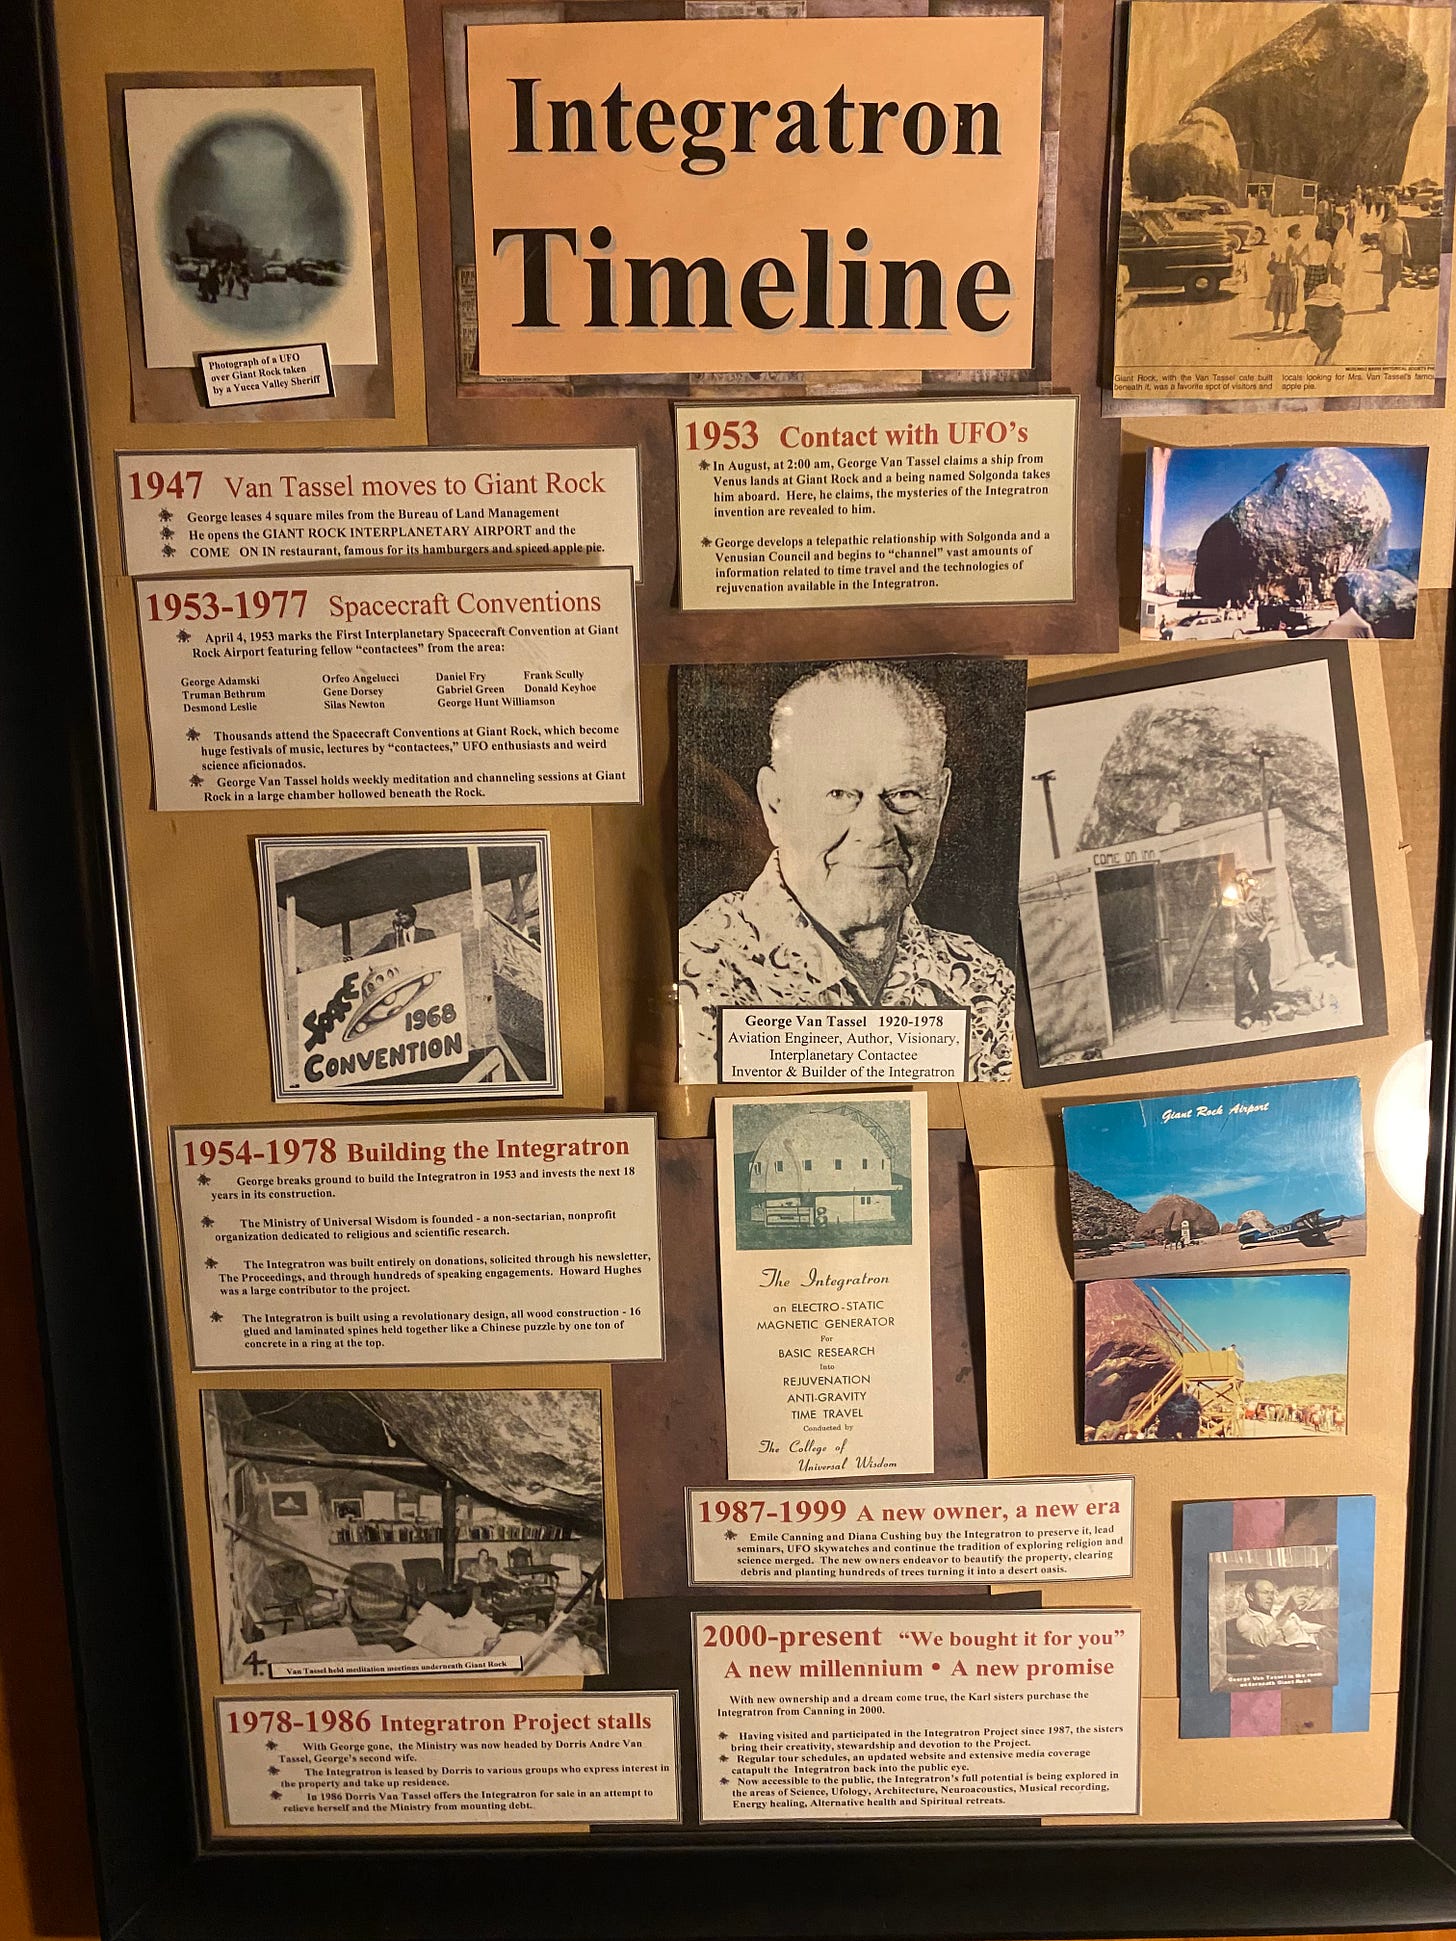 Pictures and cut-outs line a wall, showing the history of Van Tassel and the Integratron.